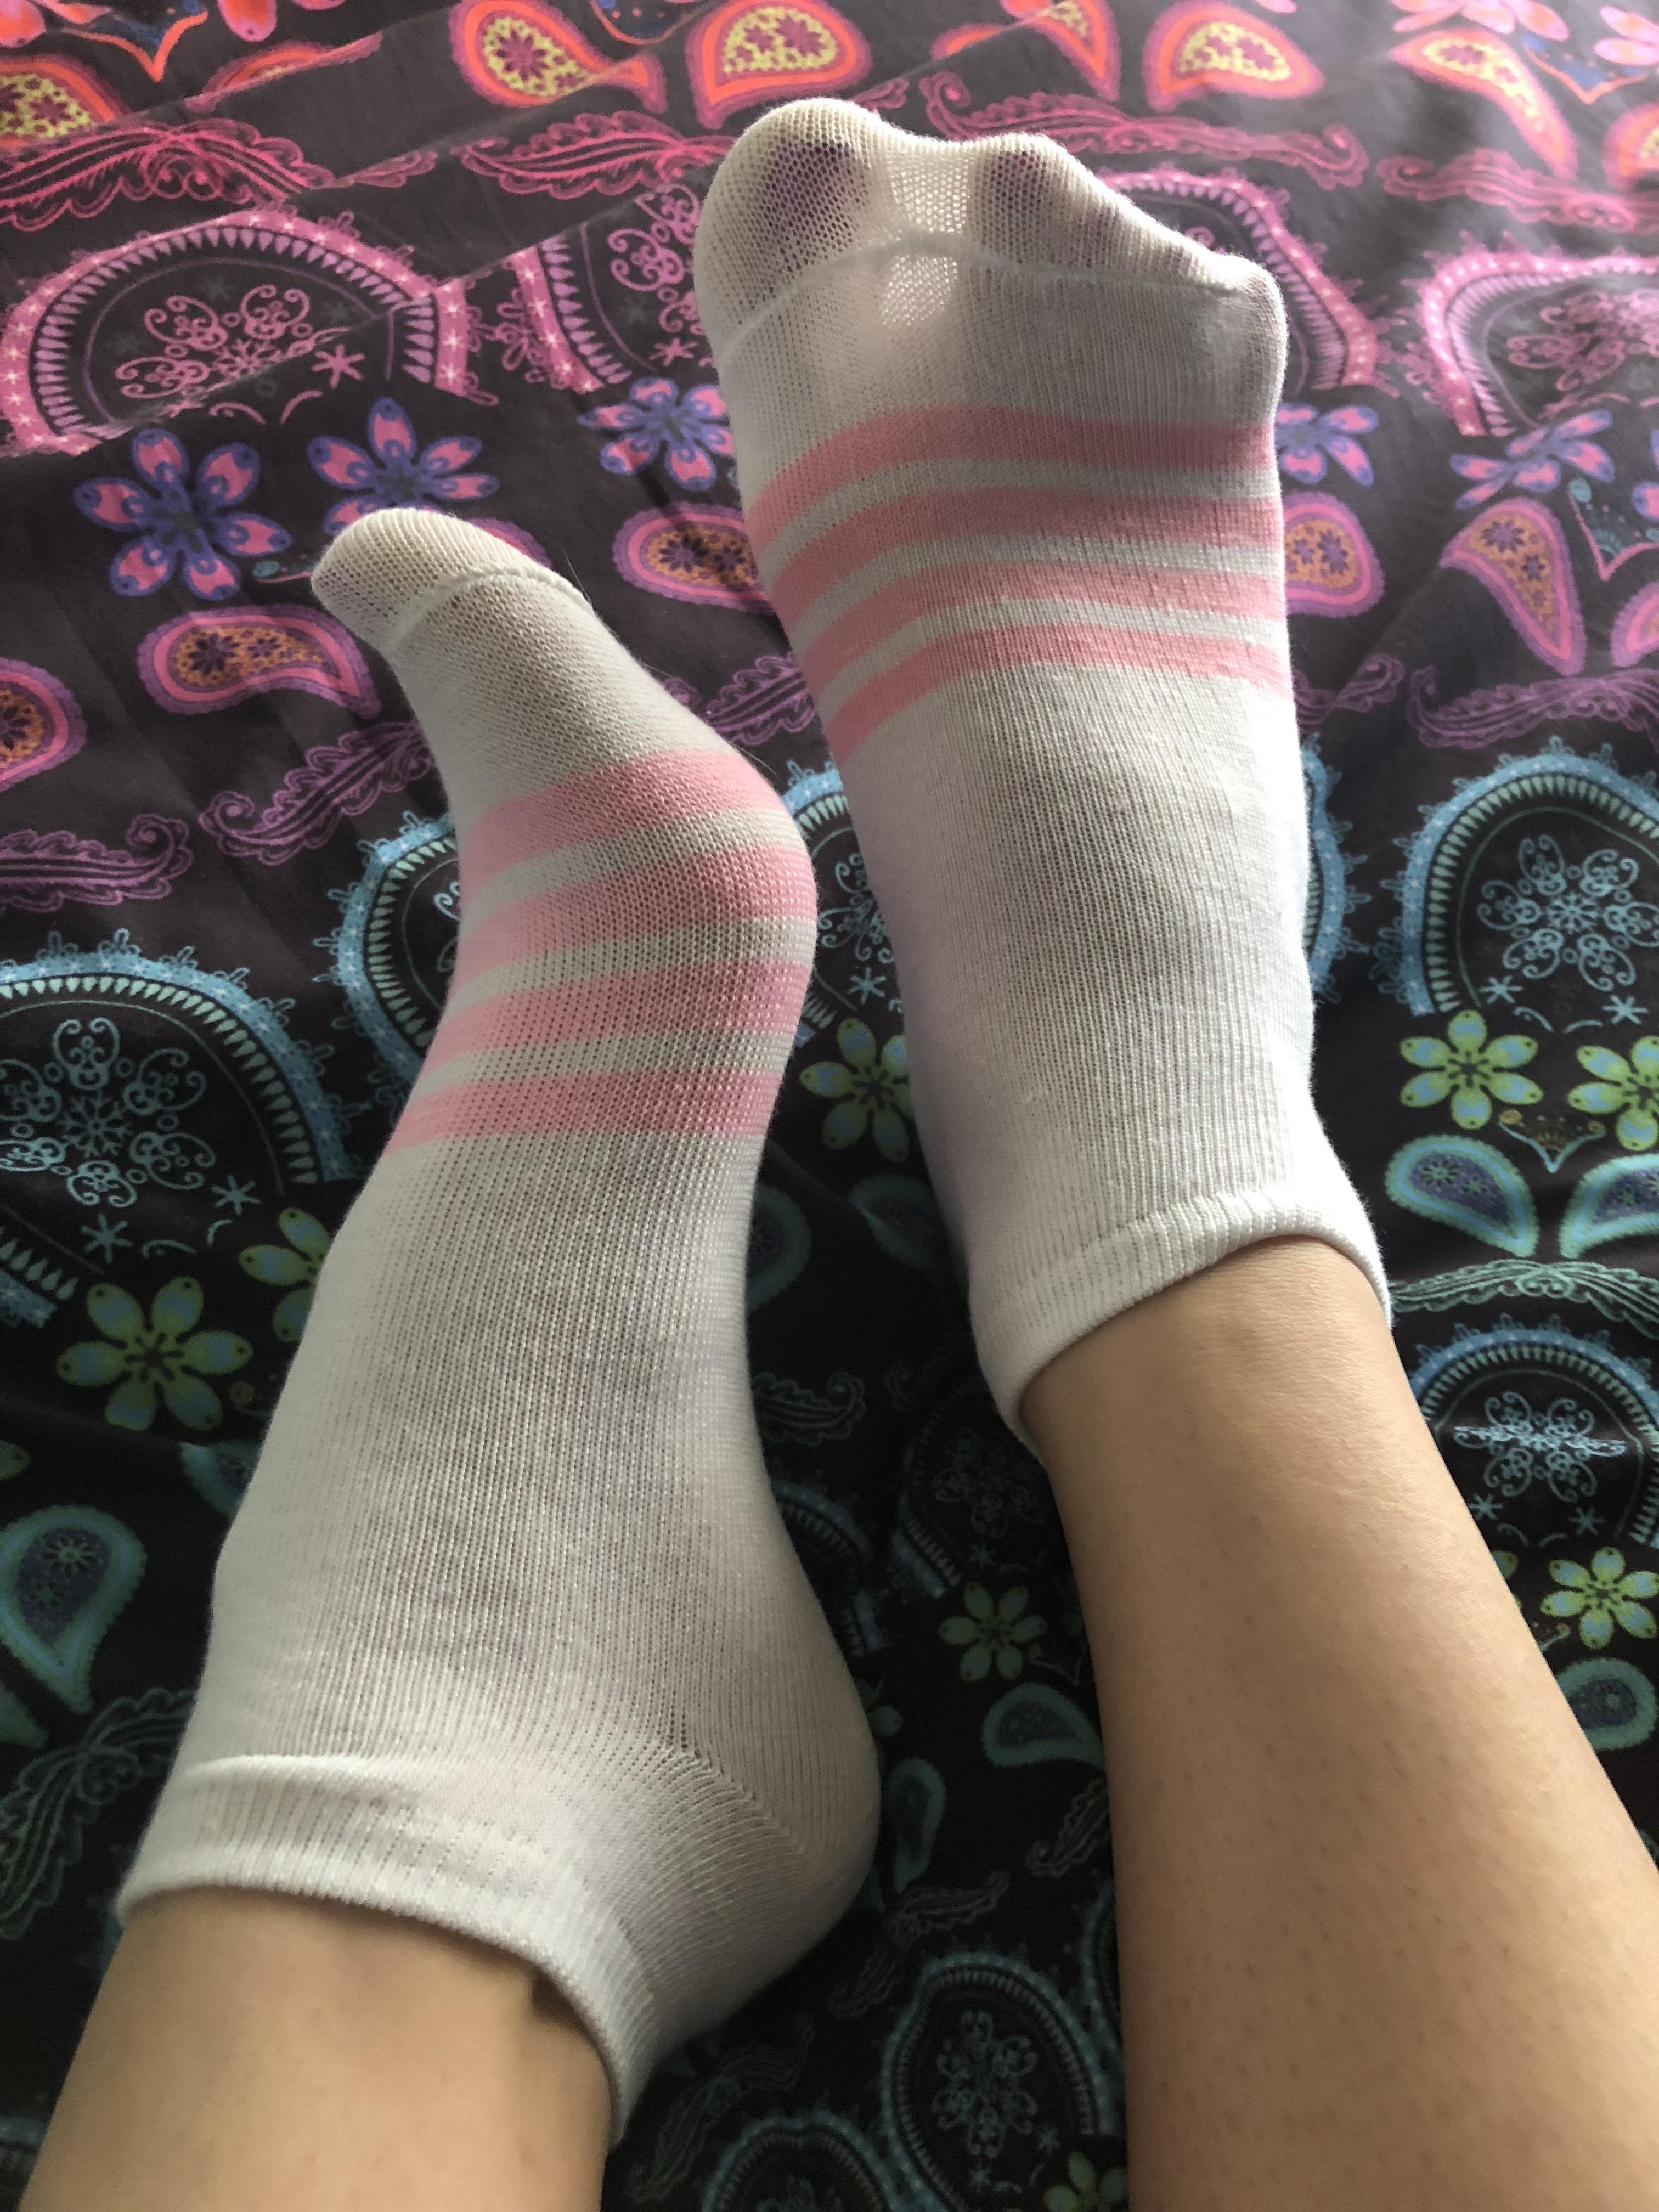 These socks are so comfy!!